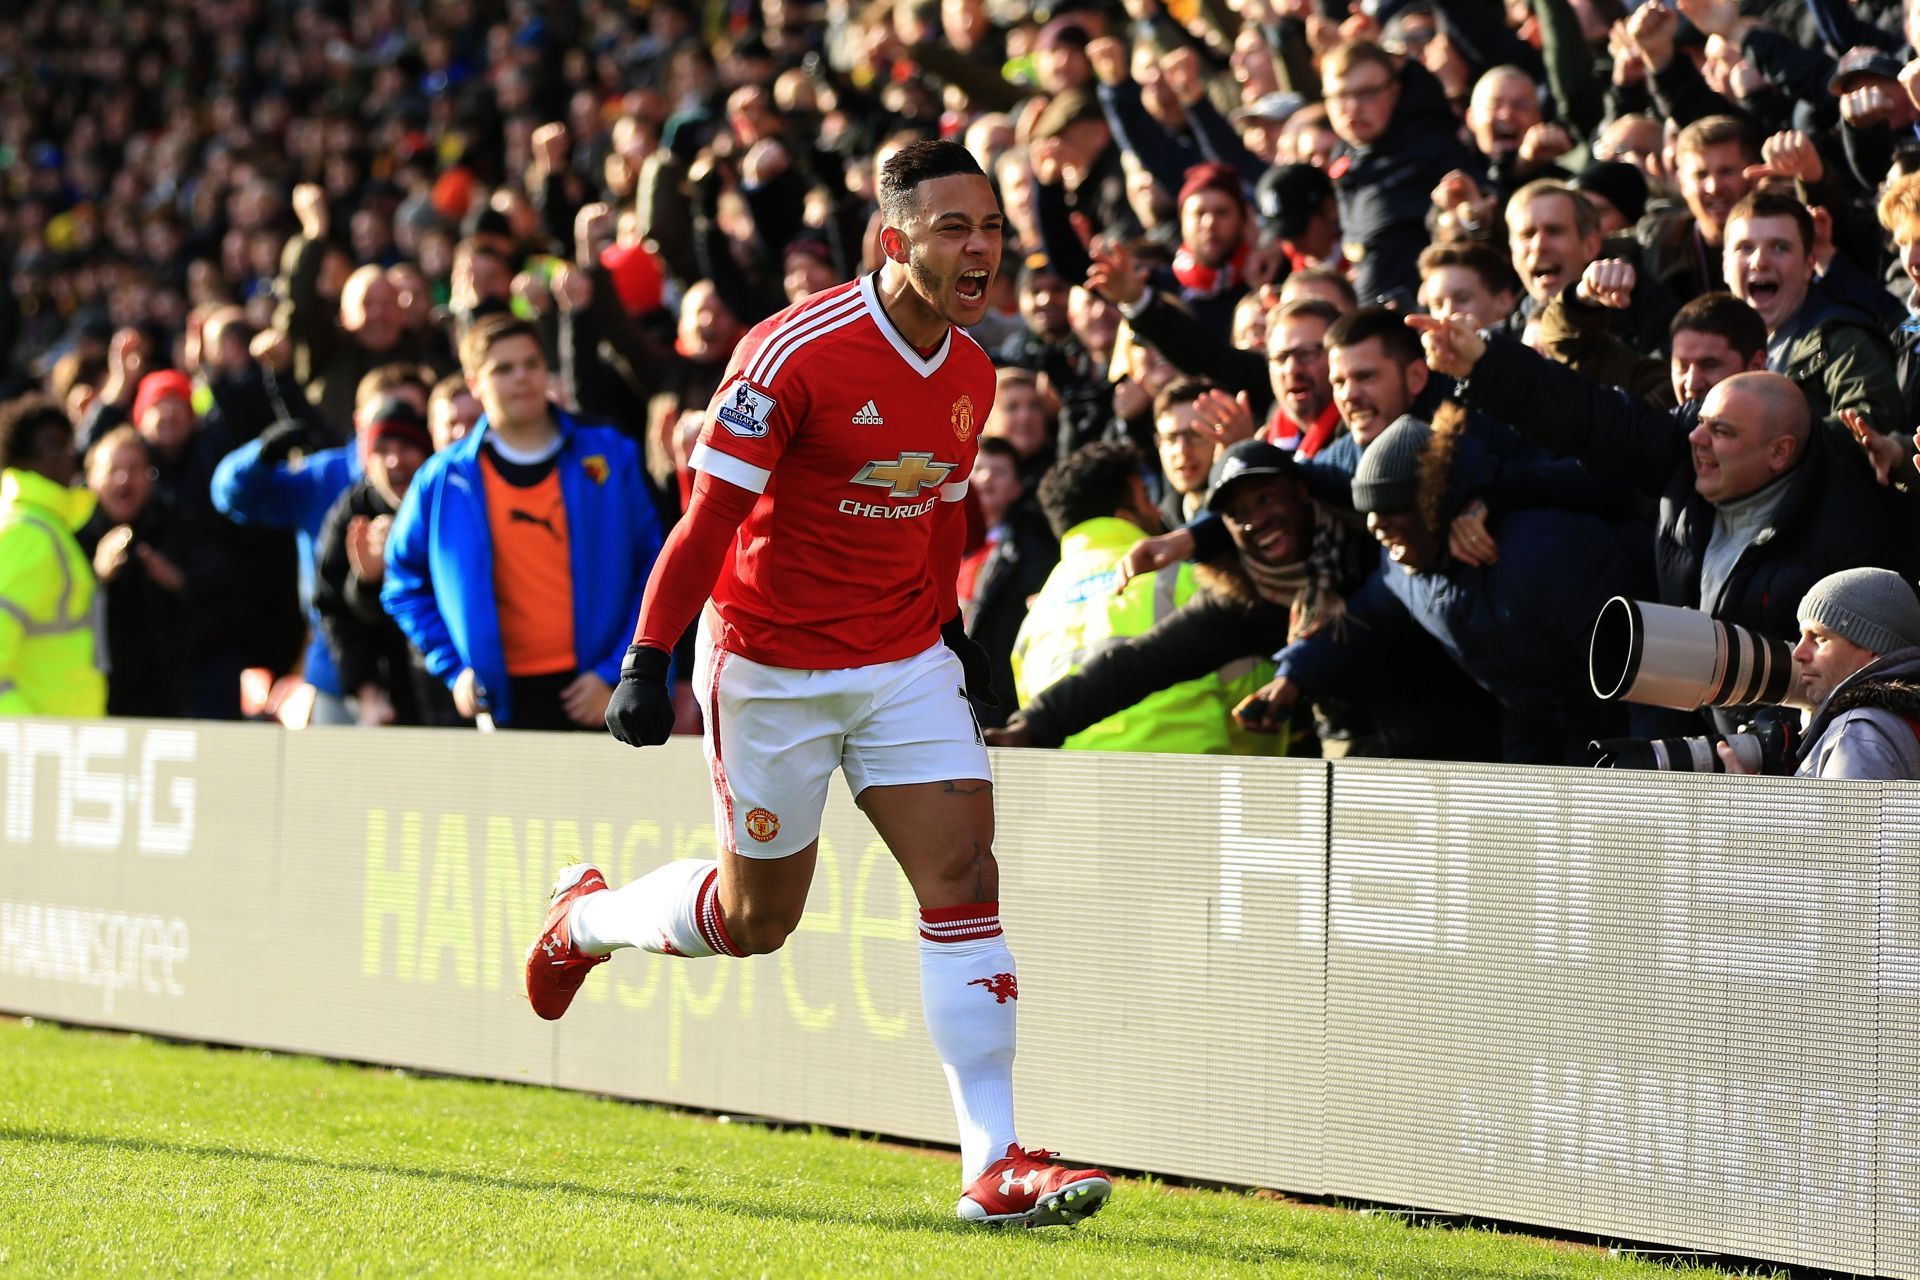 Sir Alex Ferguson was supportive of Memphis Depay when he struggled at Manchester United